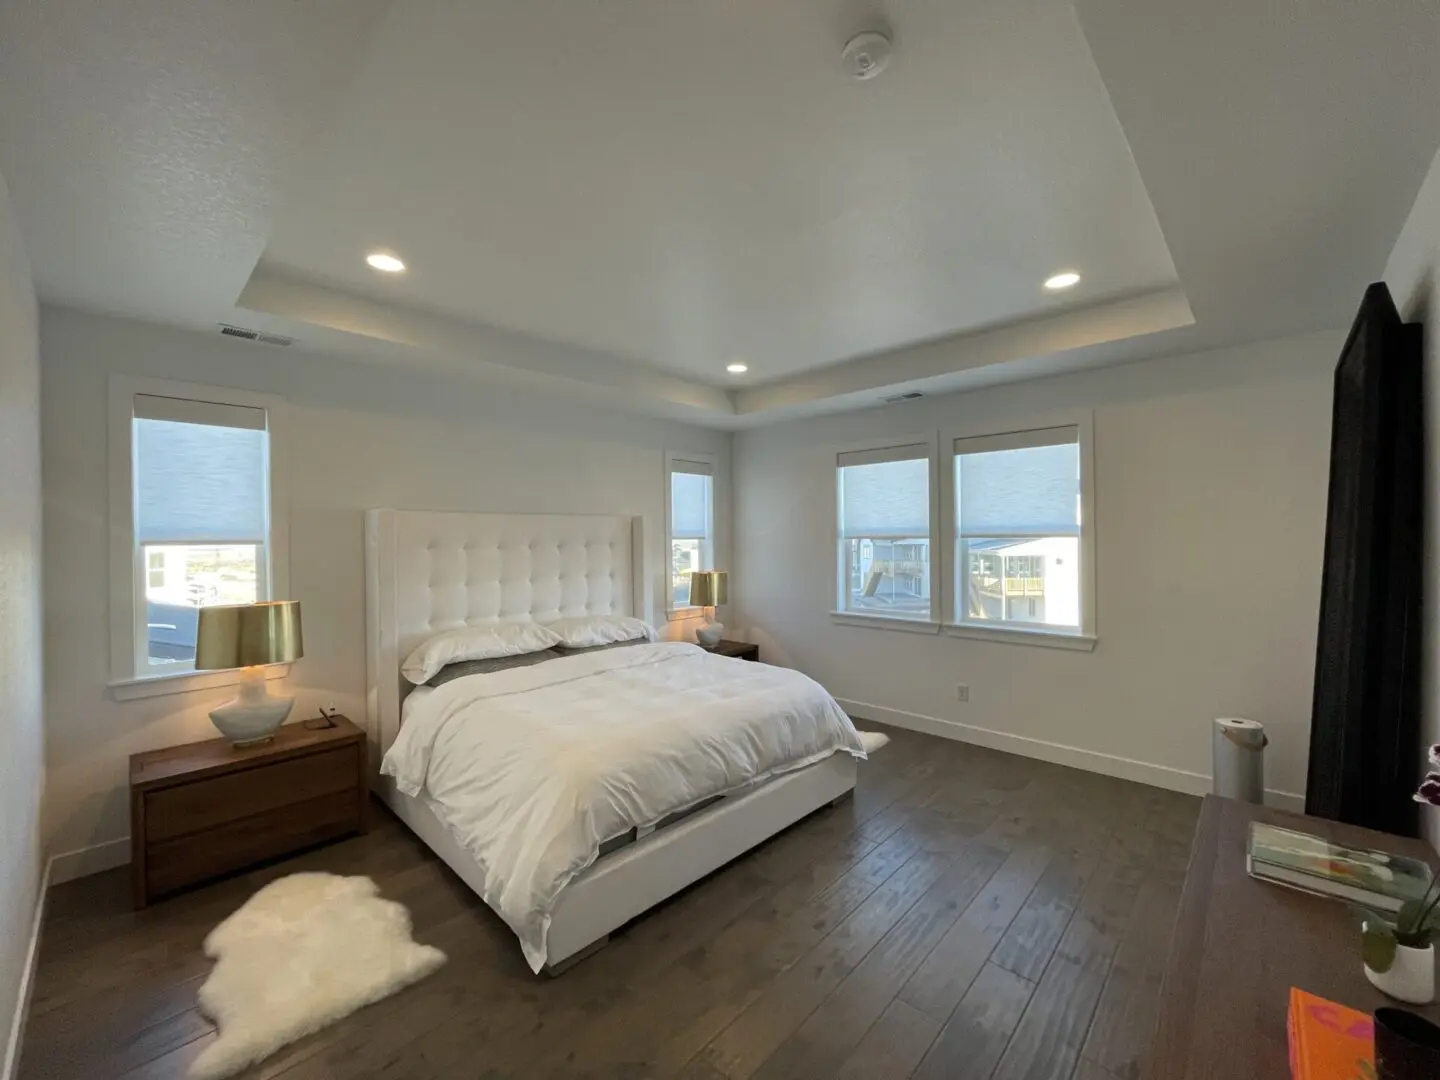 Image of white shades in bedroom